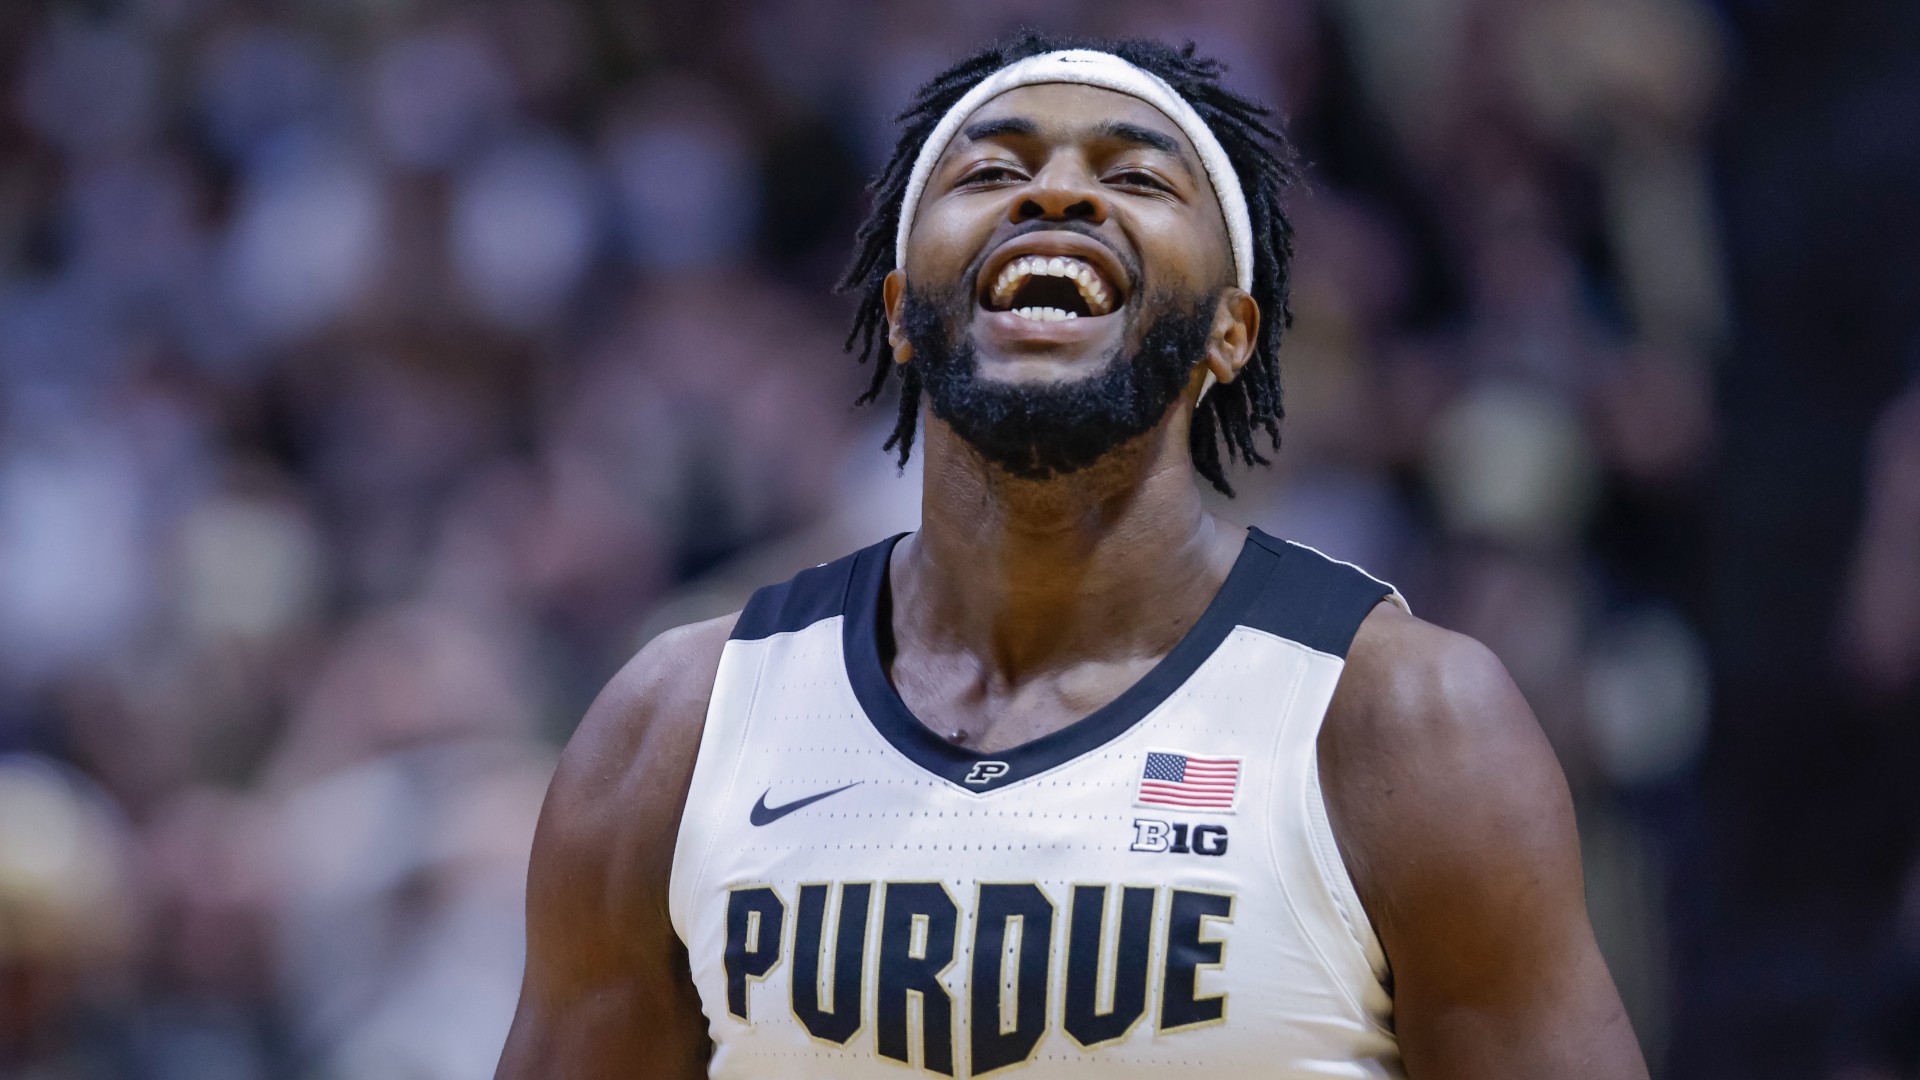 College Basketball Best Bets: Our Staff’s 5 Top Picks for Thursday, Including Purdue vs. Indiana article feature image